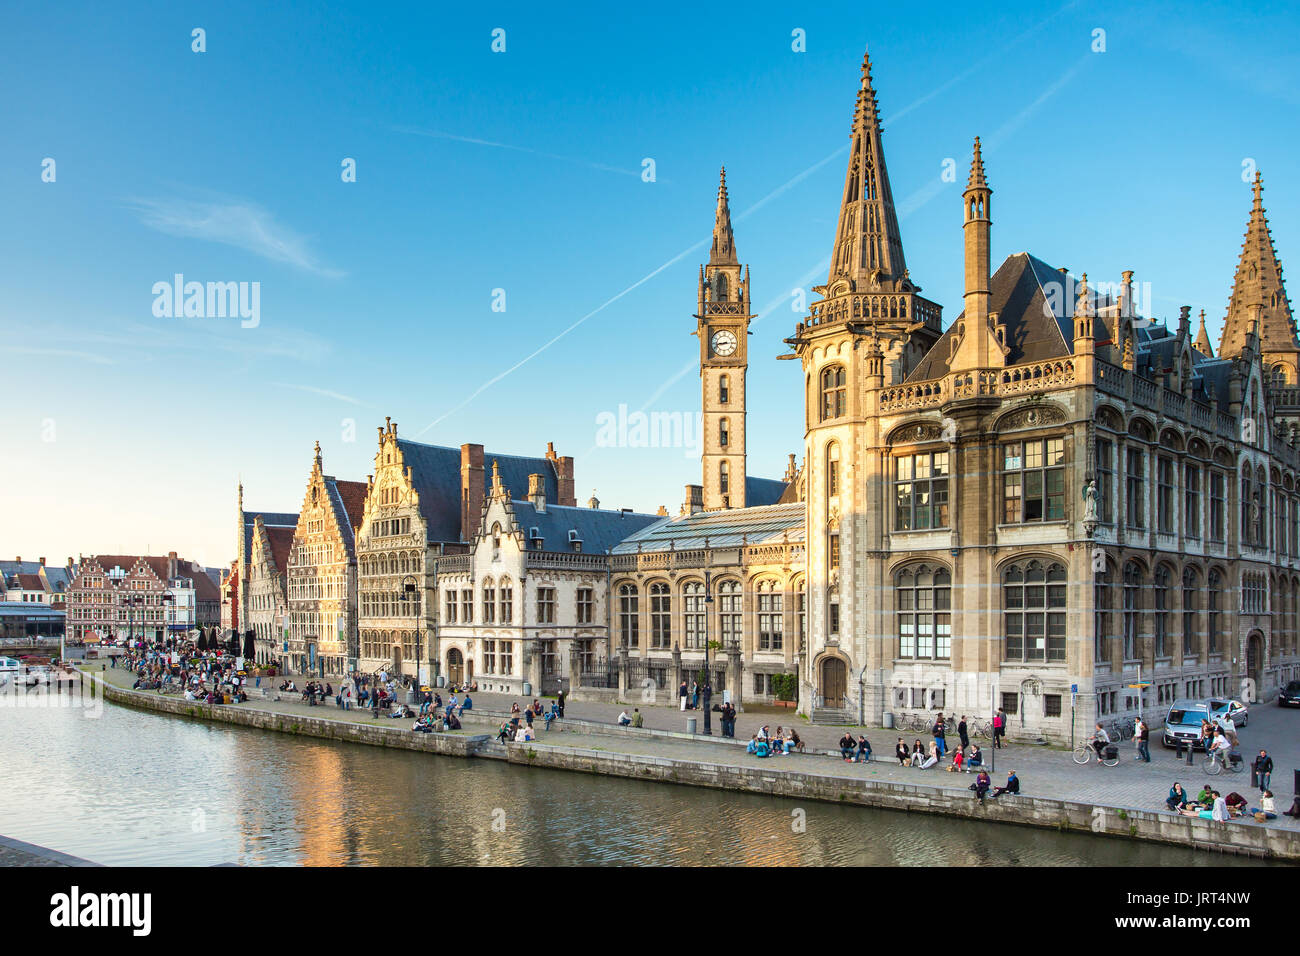 The Graslei quay in the historic city center of Ghent, Belgium. Stock Photo